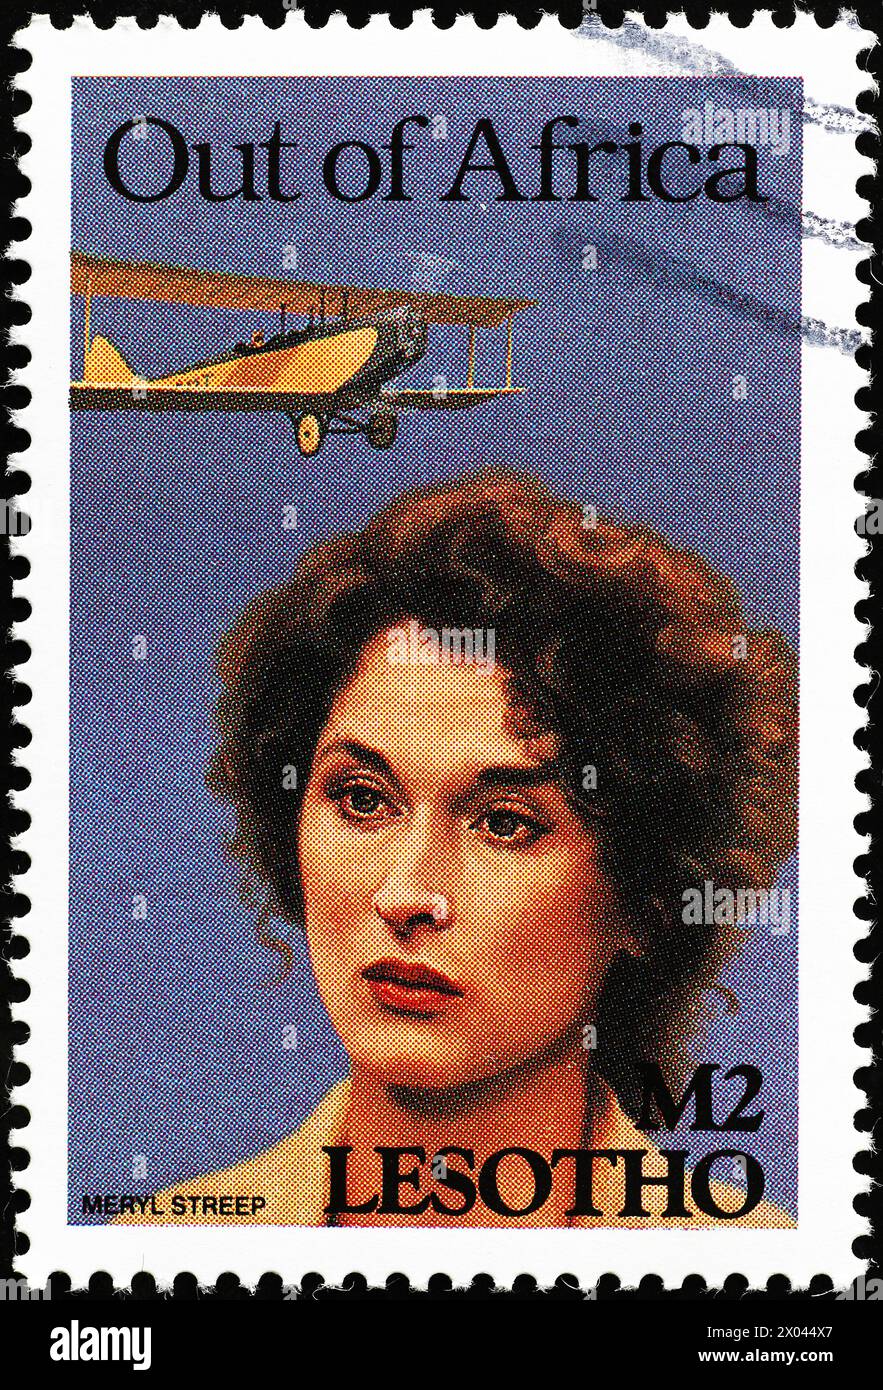 Meryl Streep in 'Out of Africa' on postage stamp Stock Photo